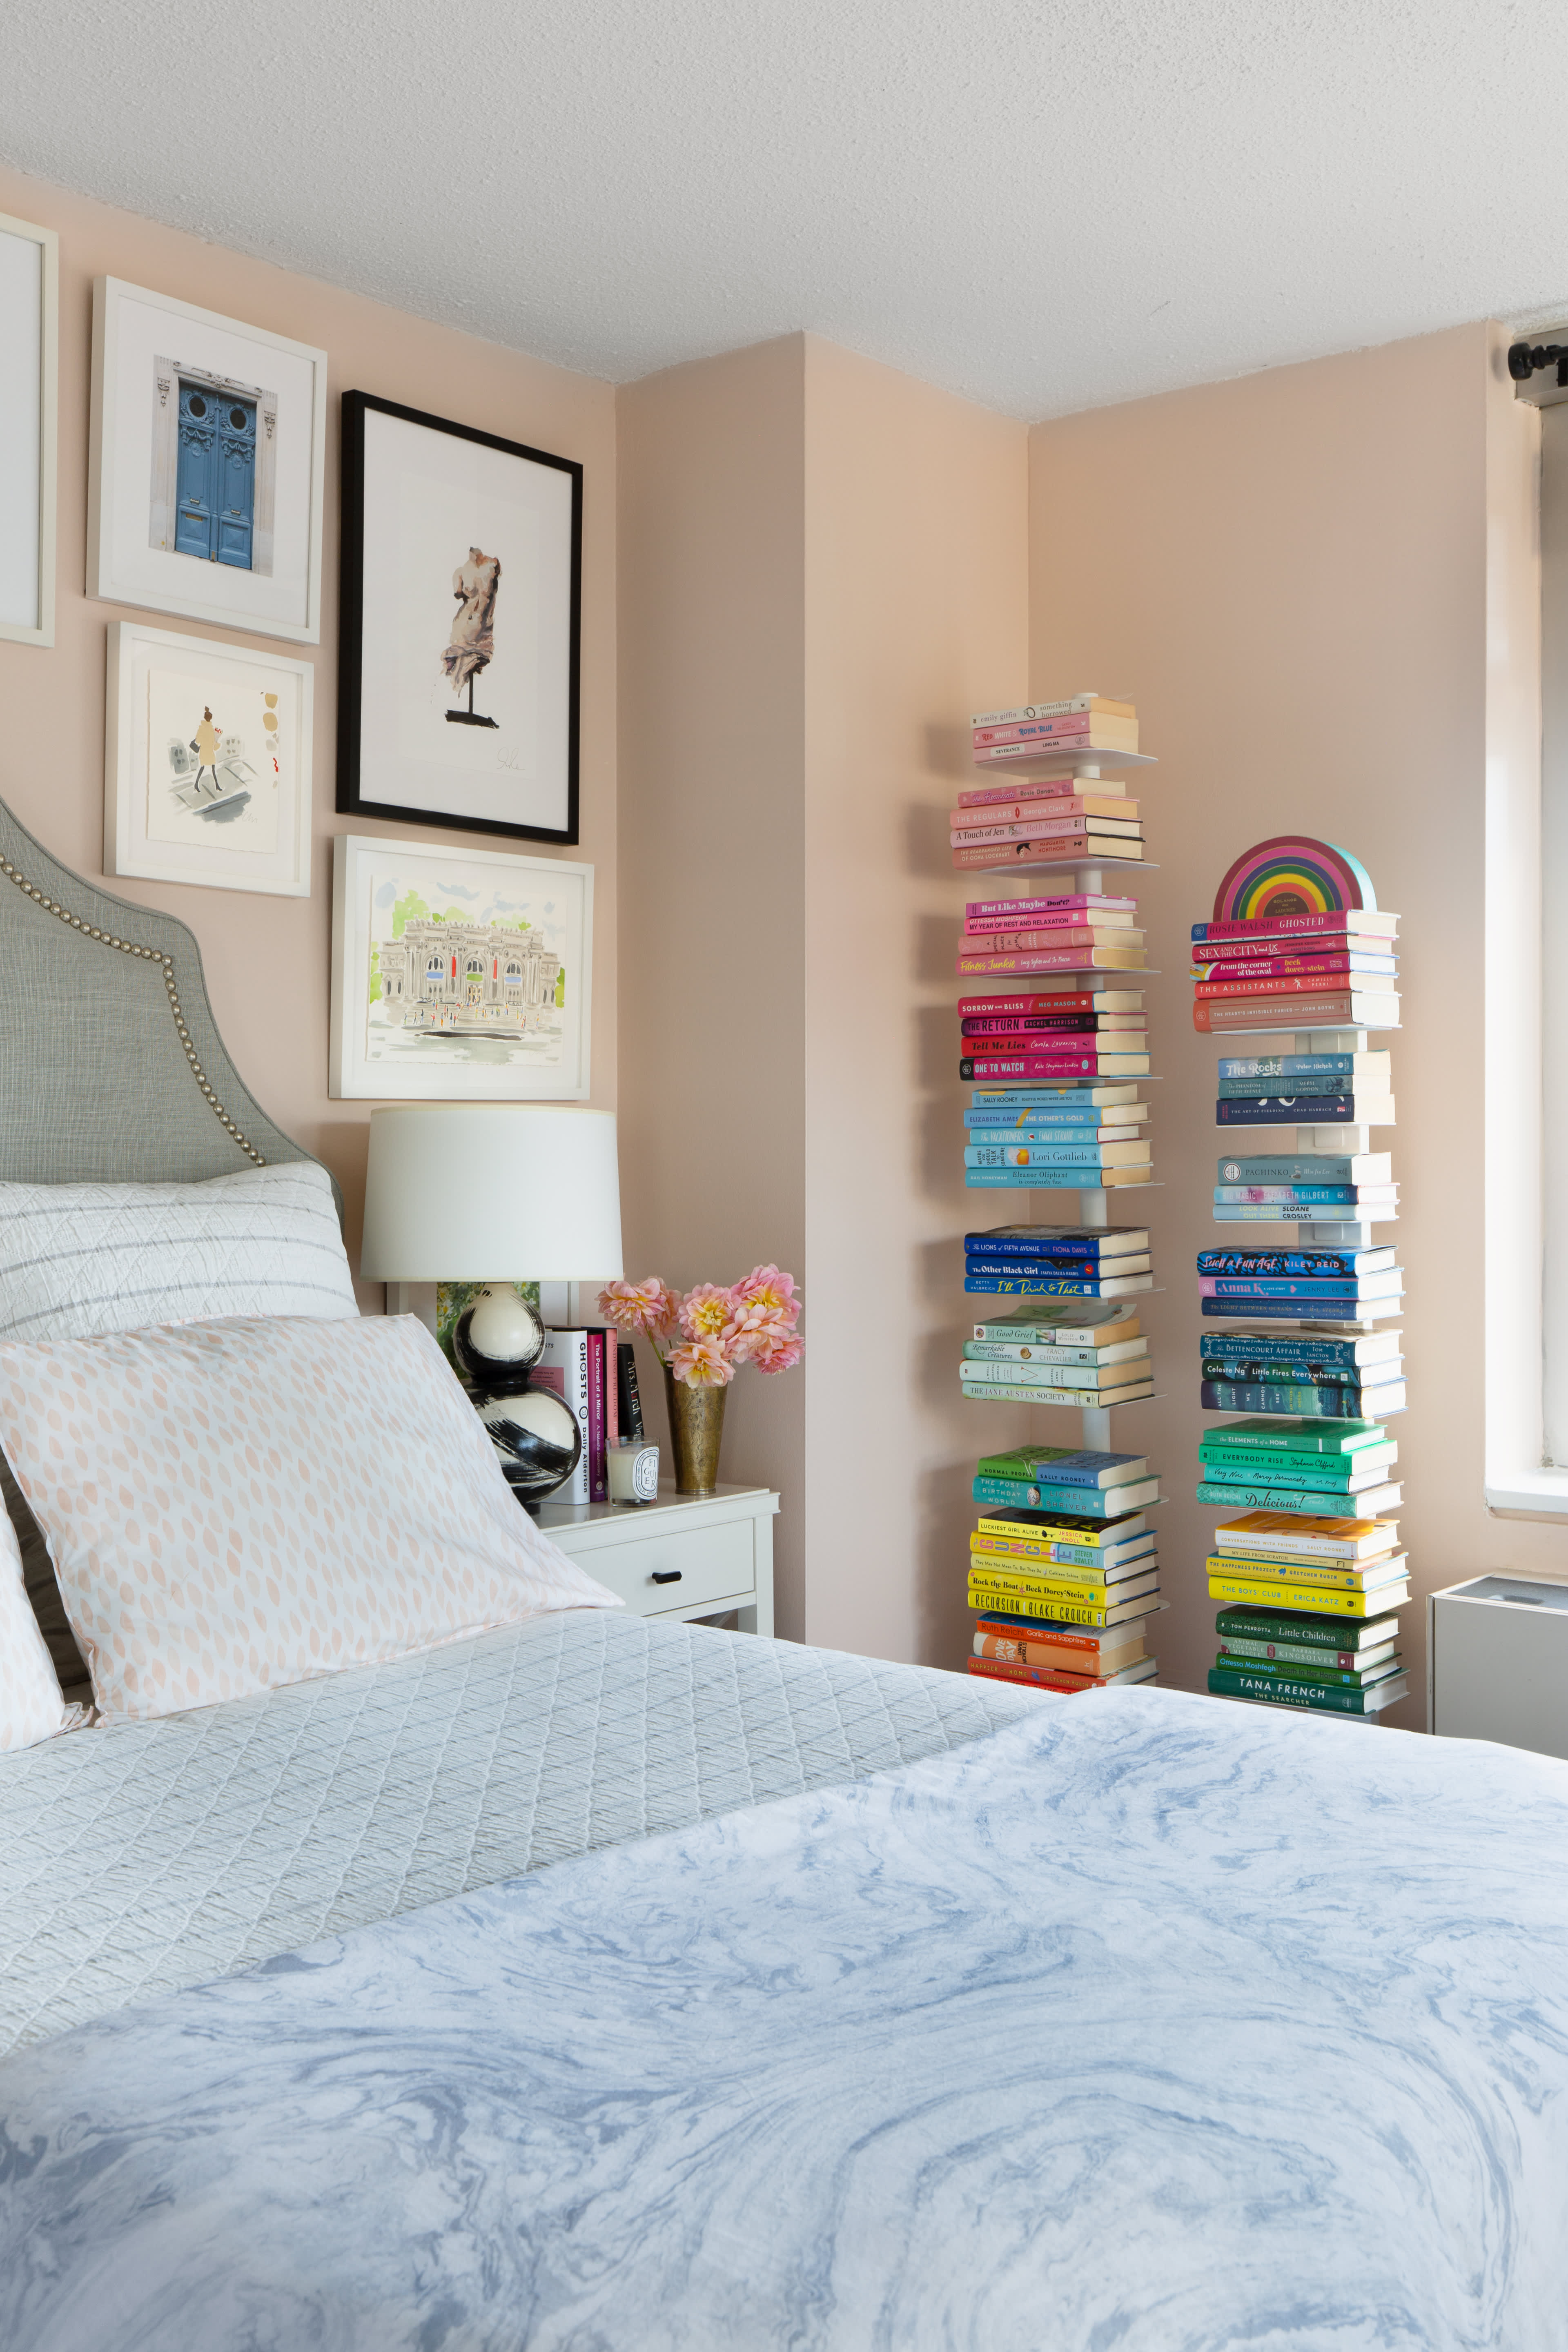 10 Best Bedroom Shelving Ideas to Try